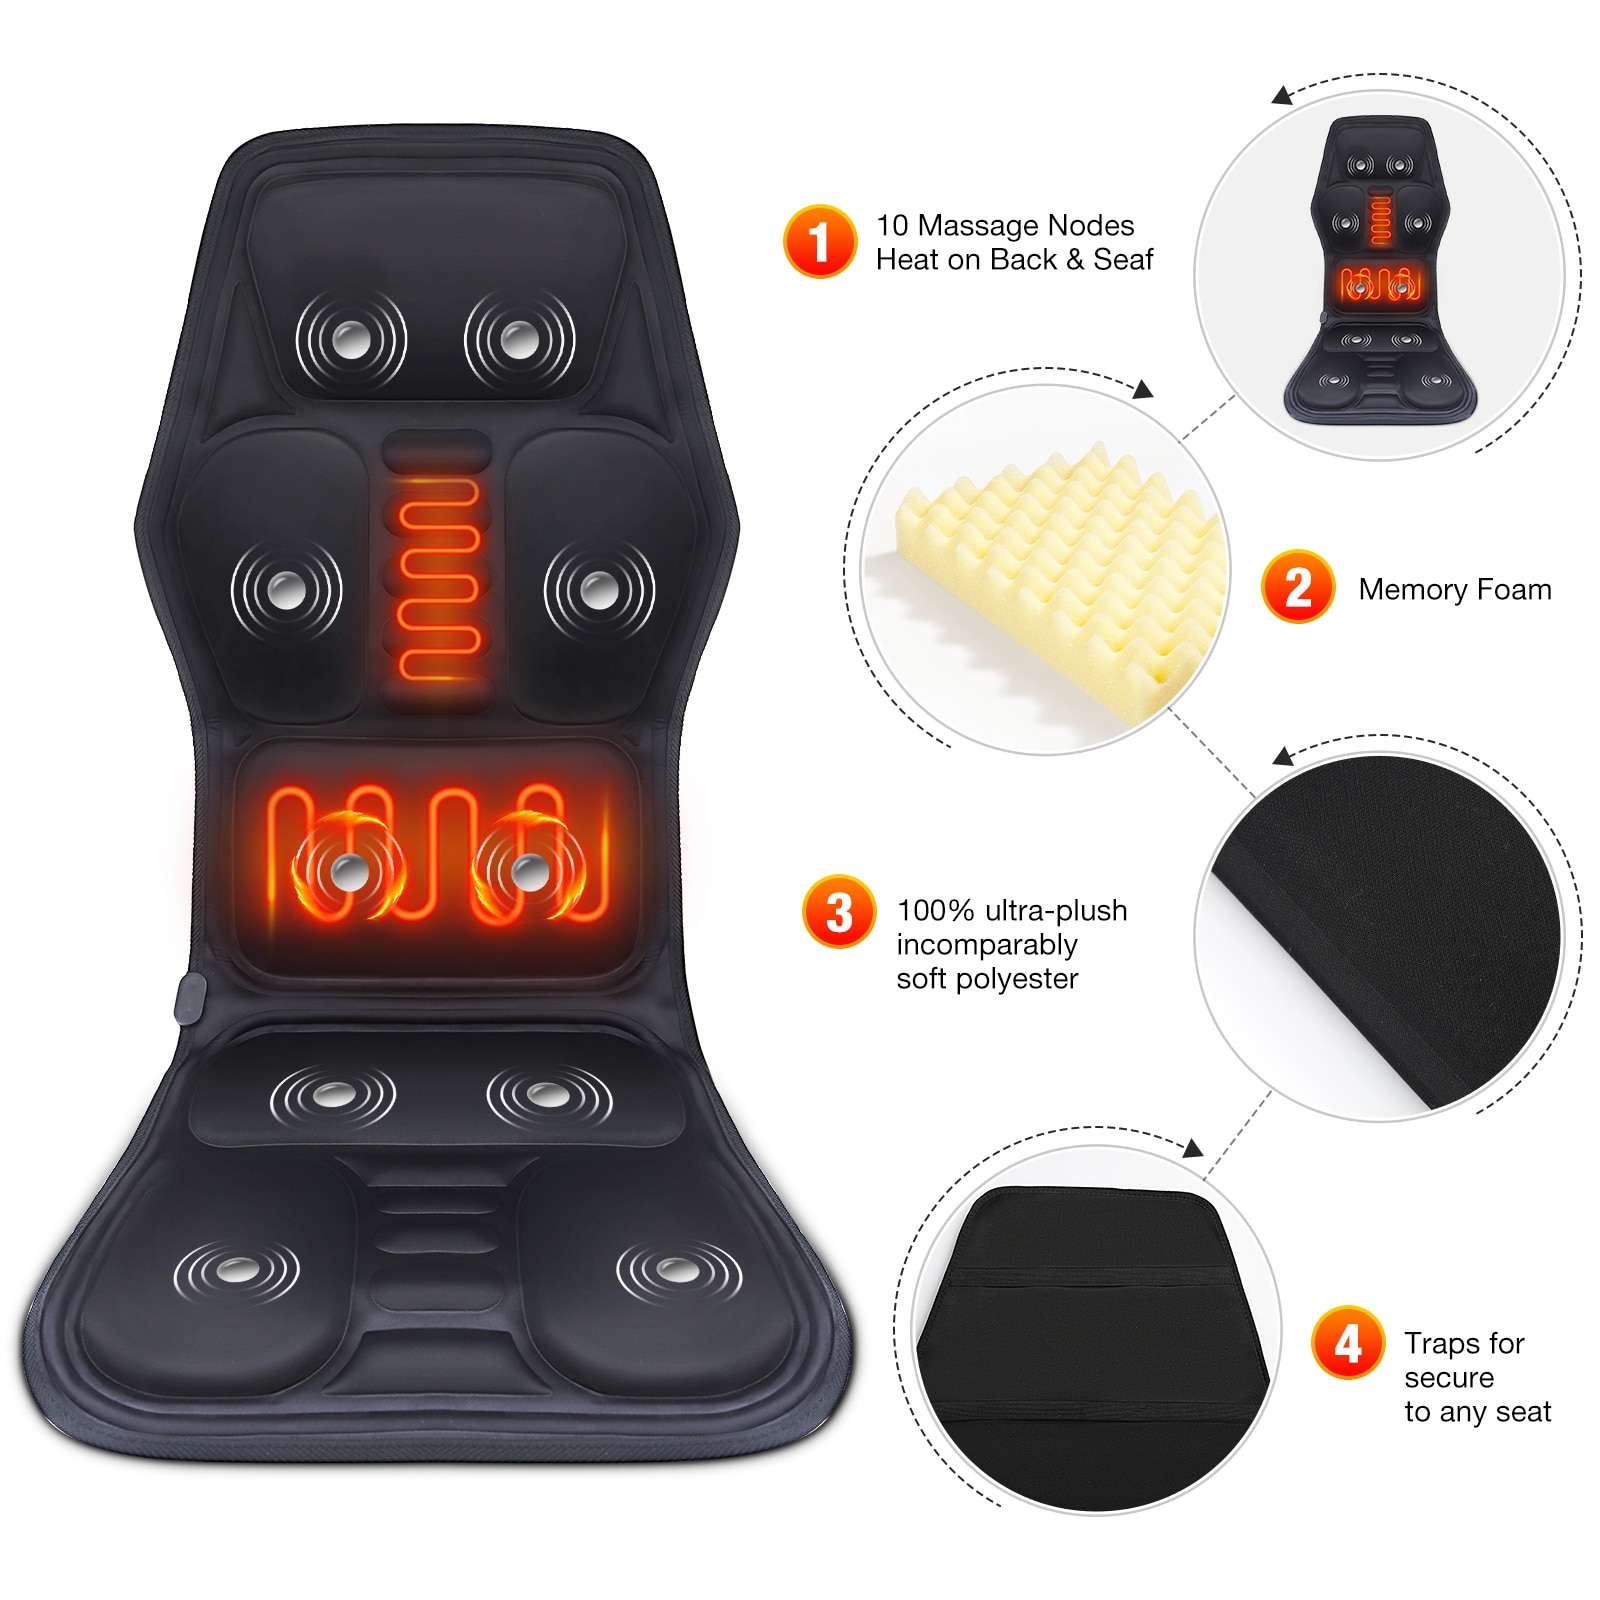 Electric Heating Vibrating Back Massager Waist Massage Cushion Full Body Massage Chair Kneading Pain Relief Car Home Office